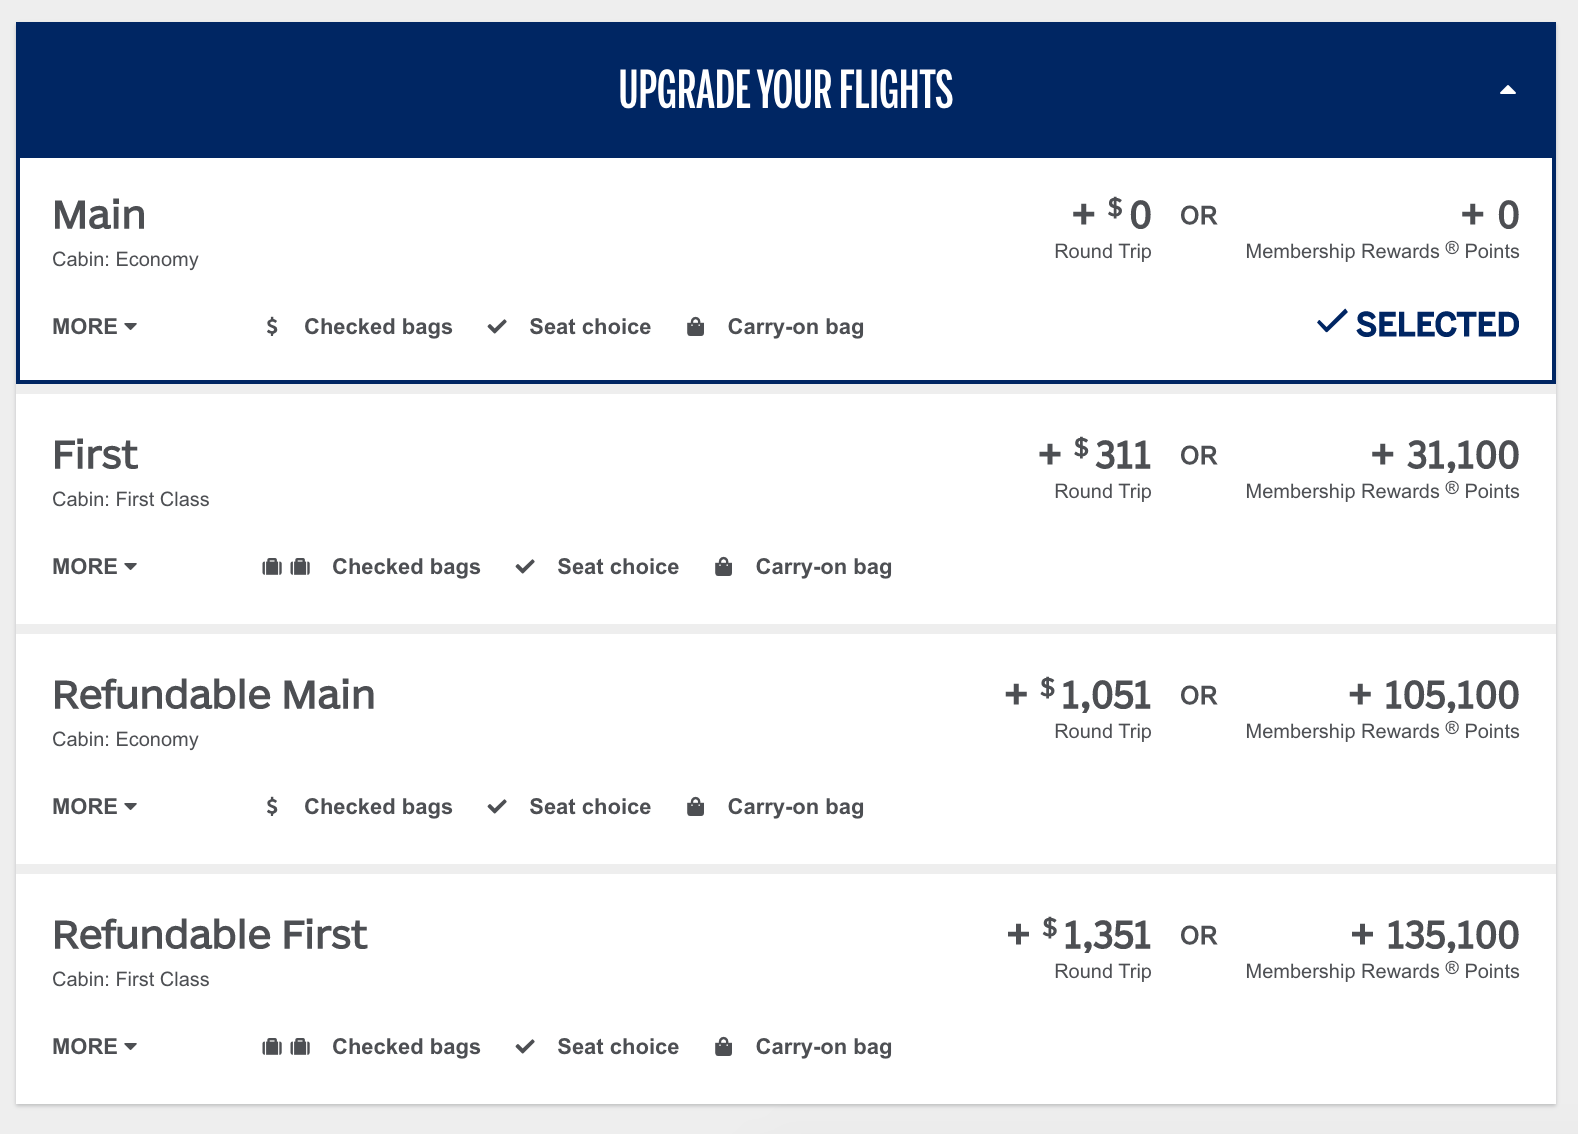 pricing options for upgrading a flight using cash or points with AmexTravel.com